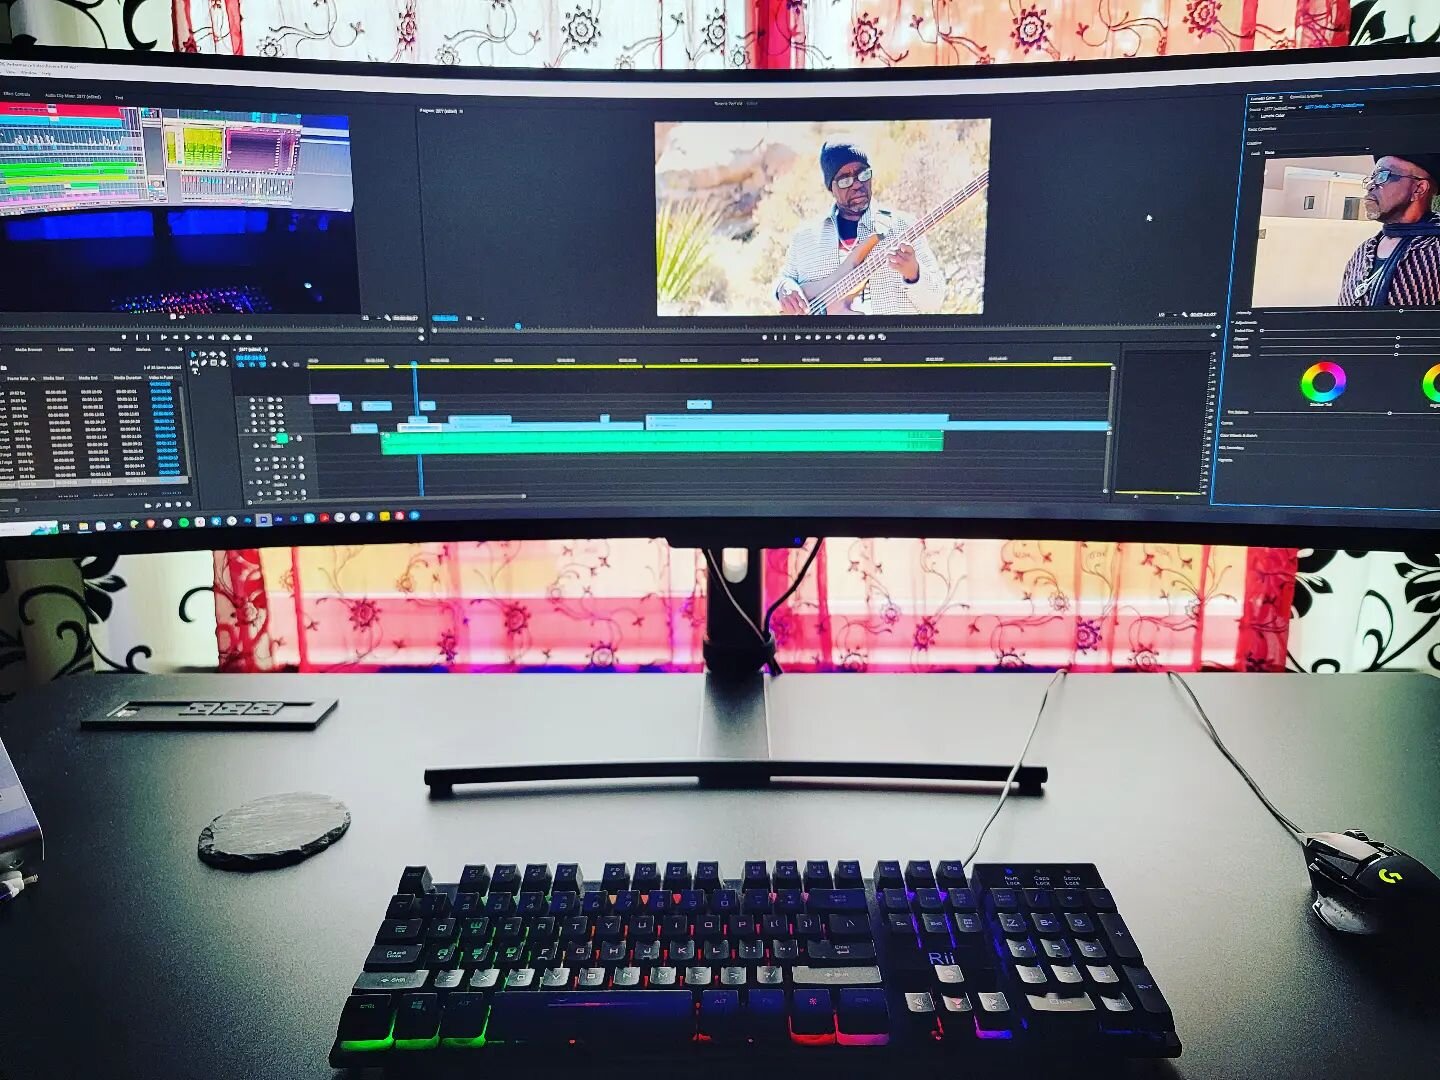 Working on something special for yall this weekend!! It may have something to do with @circa83music &amp; @bombbass1014 🤔🫢😍🤩🥰 #dtProducerLife
&bull;
#video #musicvideo #lofi #smoothjazz #videoediting